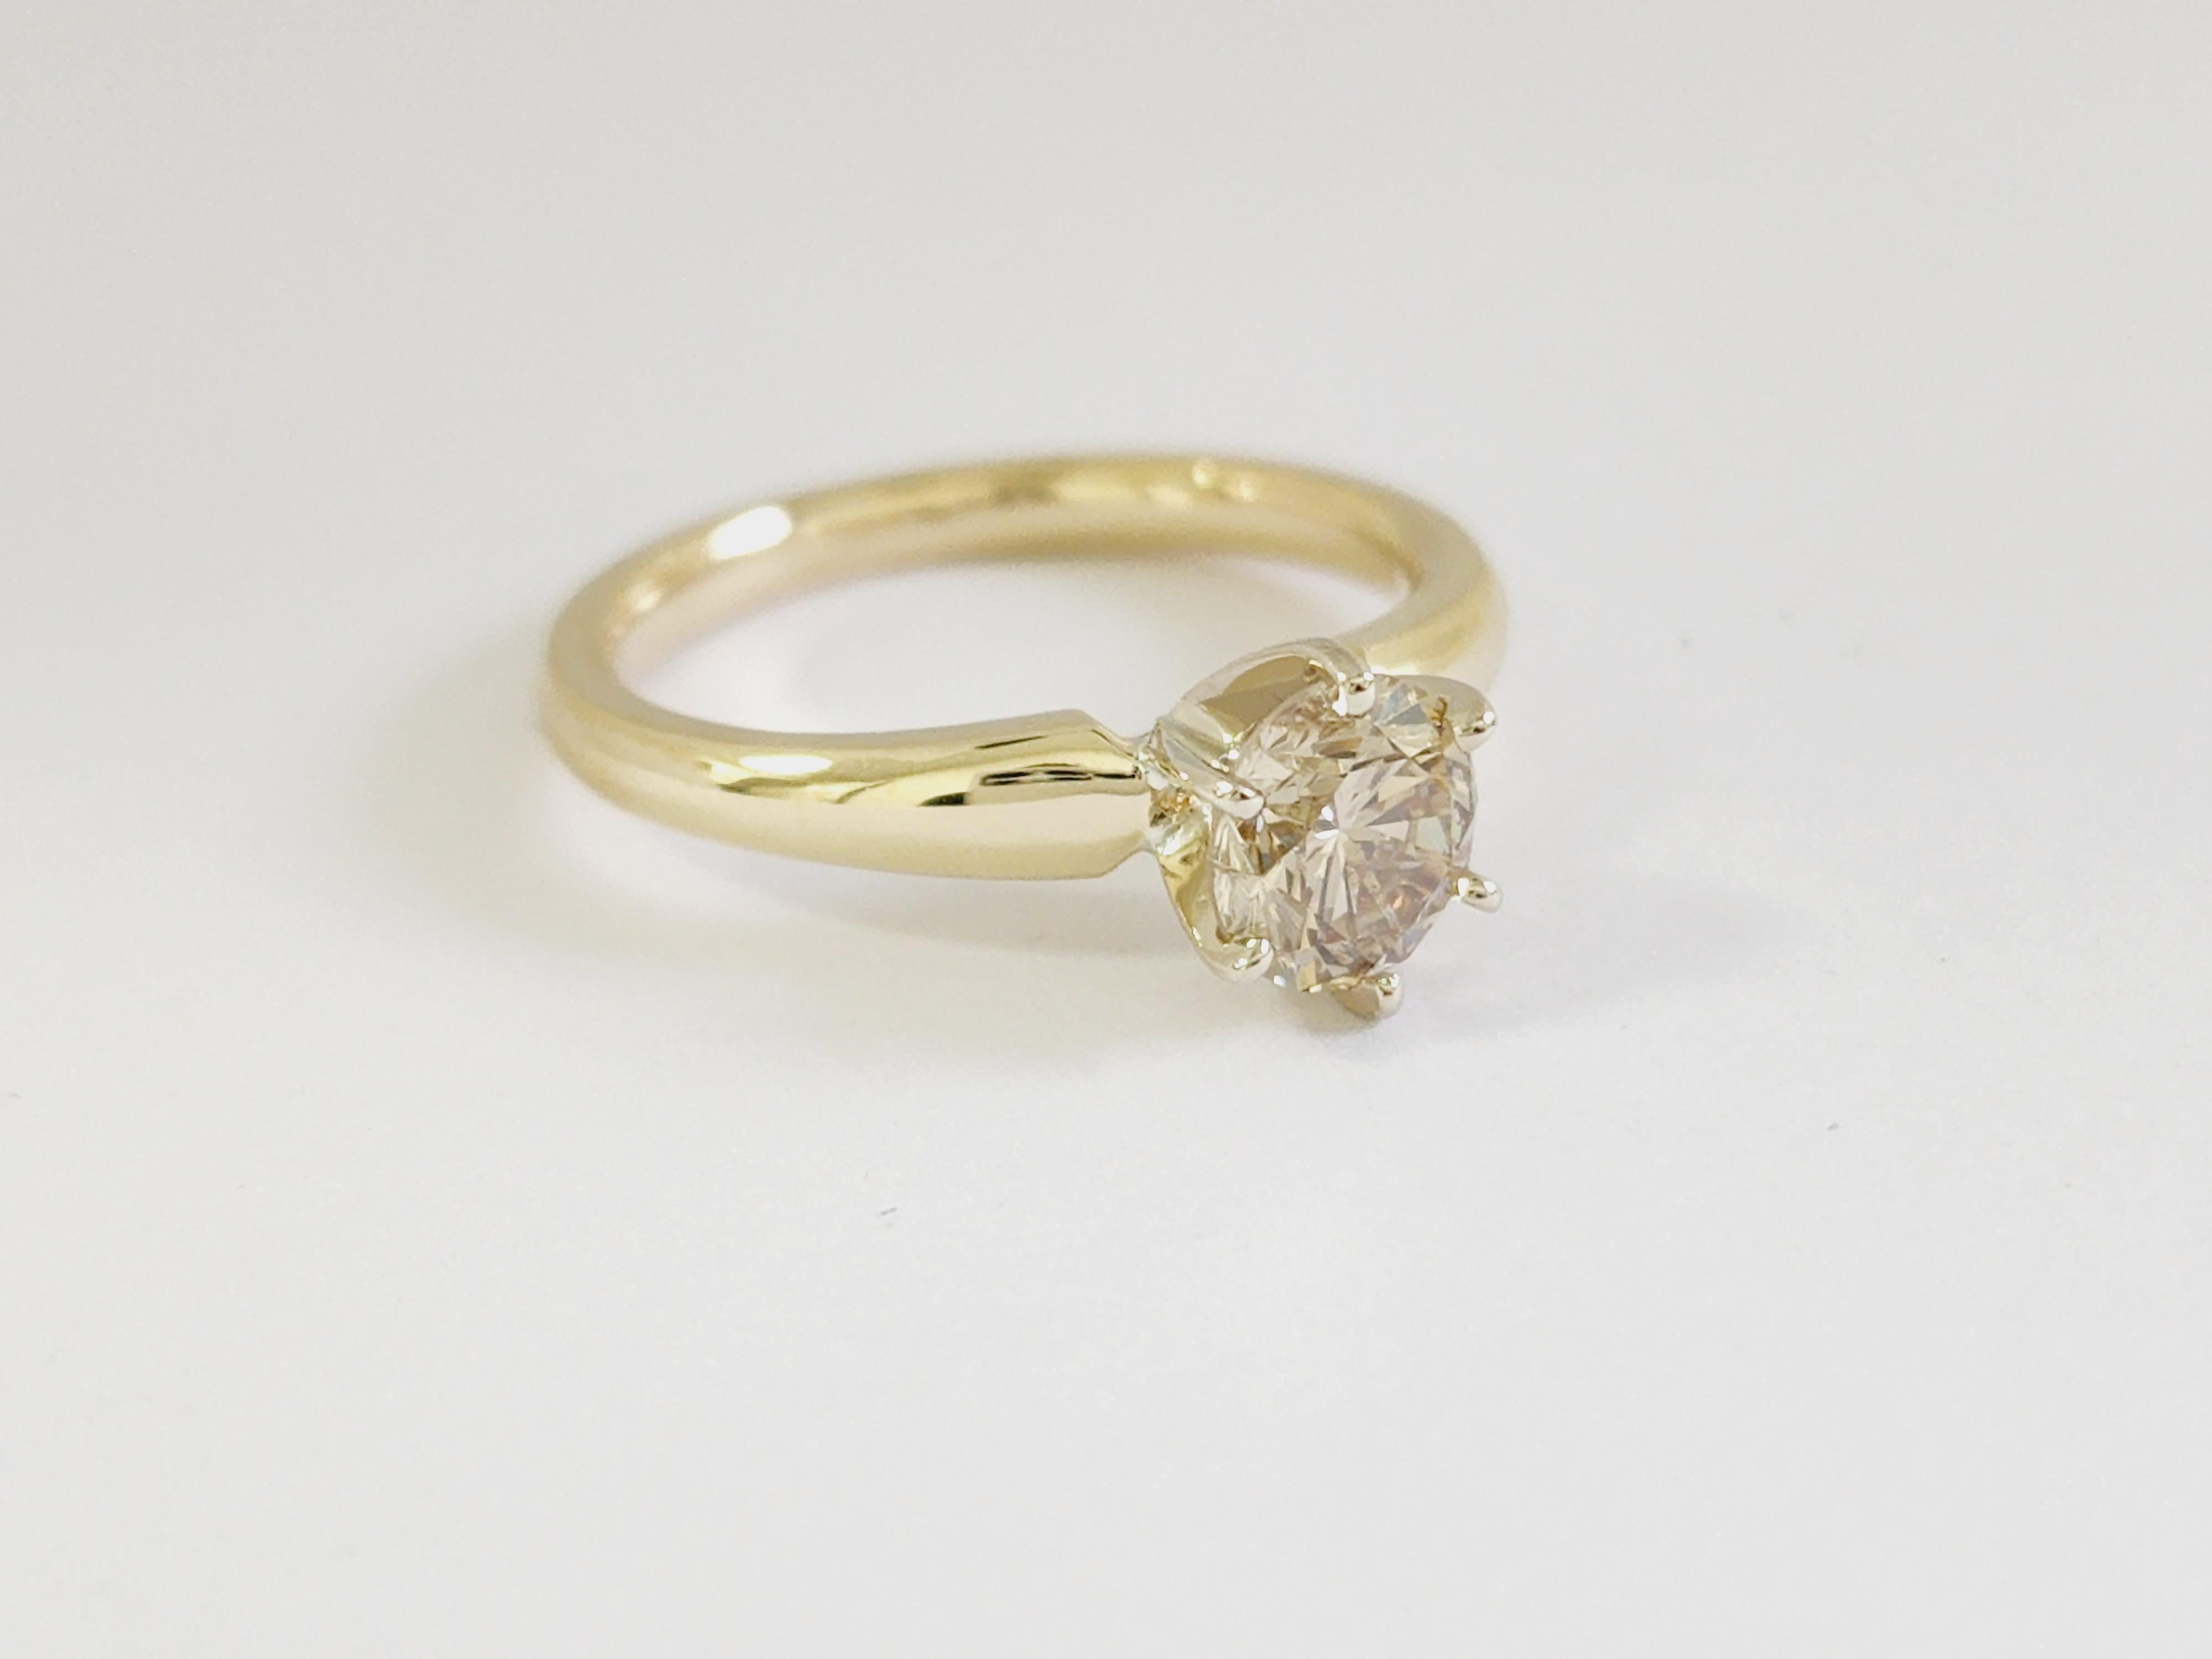 1.12 Carats round diamond set on a 6 prong Yellow gold 14 Karat solitaire Ring. 
Color Fancy Light Brownish Yellow, Clarity I1
Ring Size 7 can be resized